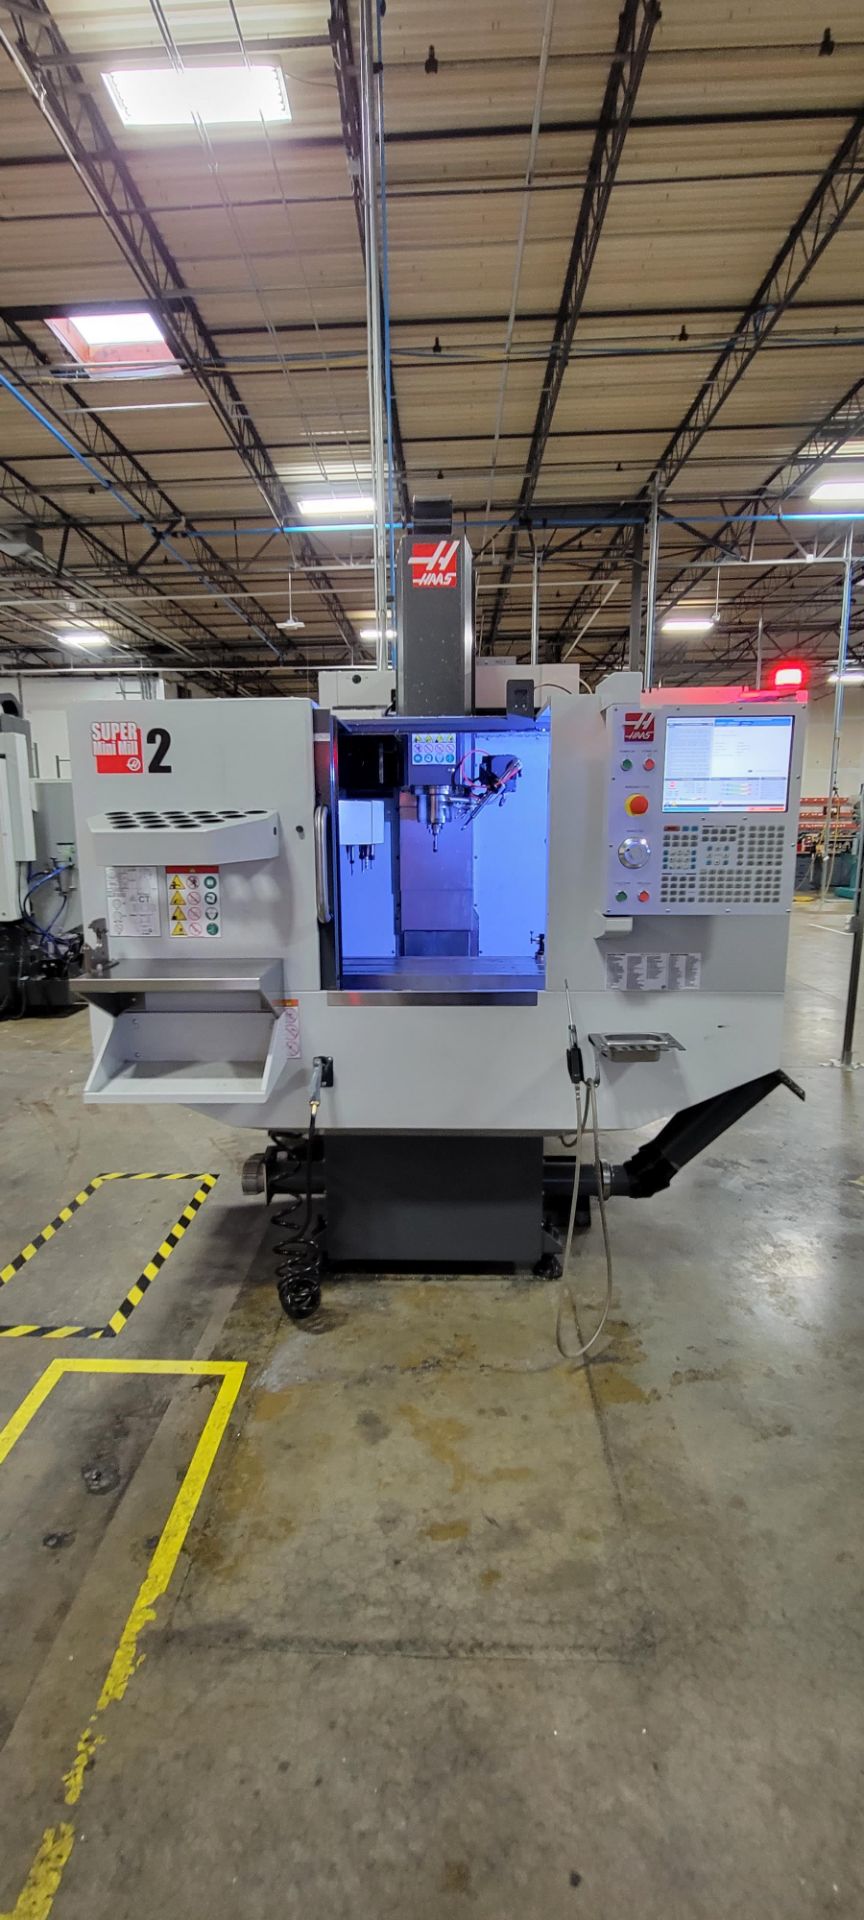 Haas Super Mini Mill 2 3-Axis CNC Vertical Machining Center - Image 2 of 13